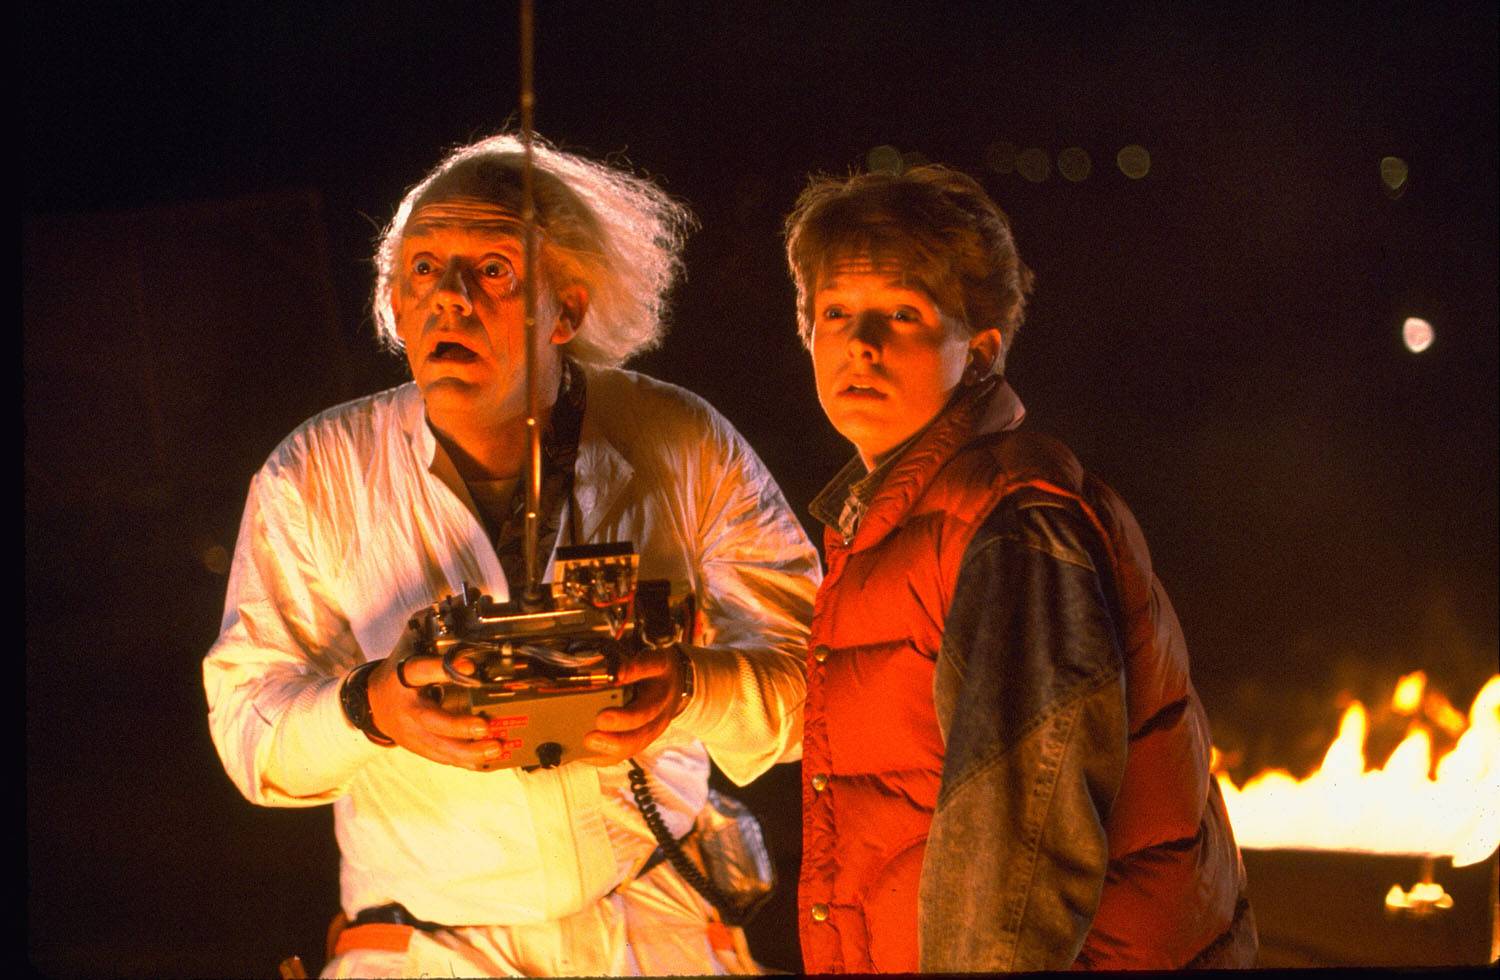 Back to the Future (1985) Directed by Robert Zemeckis Shown from left: Christopher Lloyd (as Dr. Emmett Brown), Michael J. Fox (as Marty McFly)